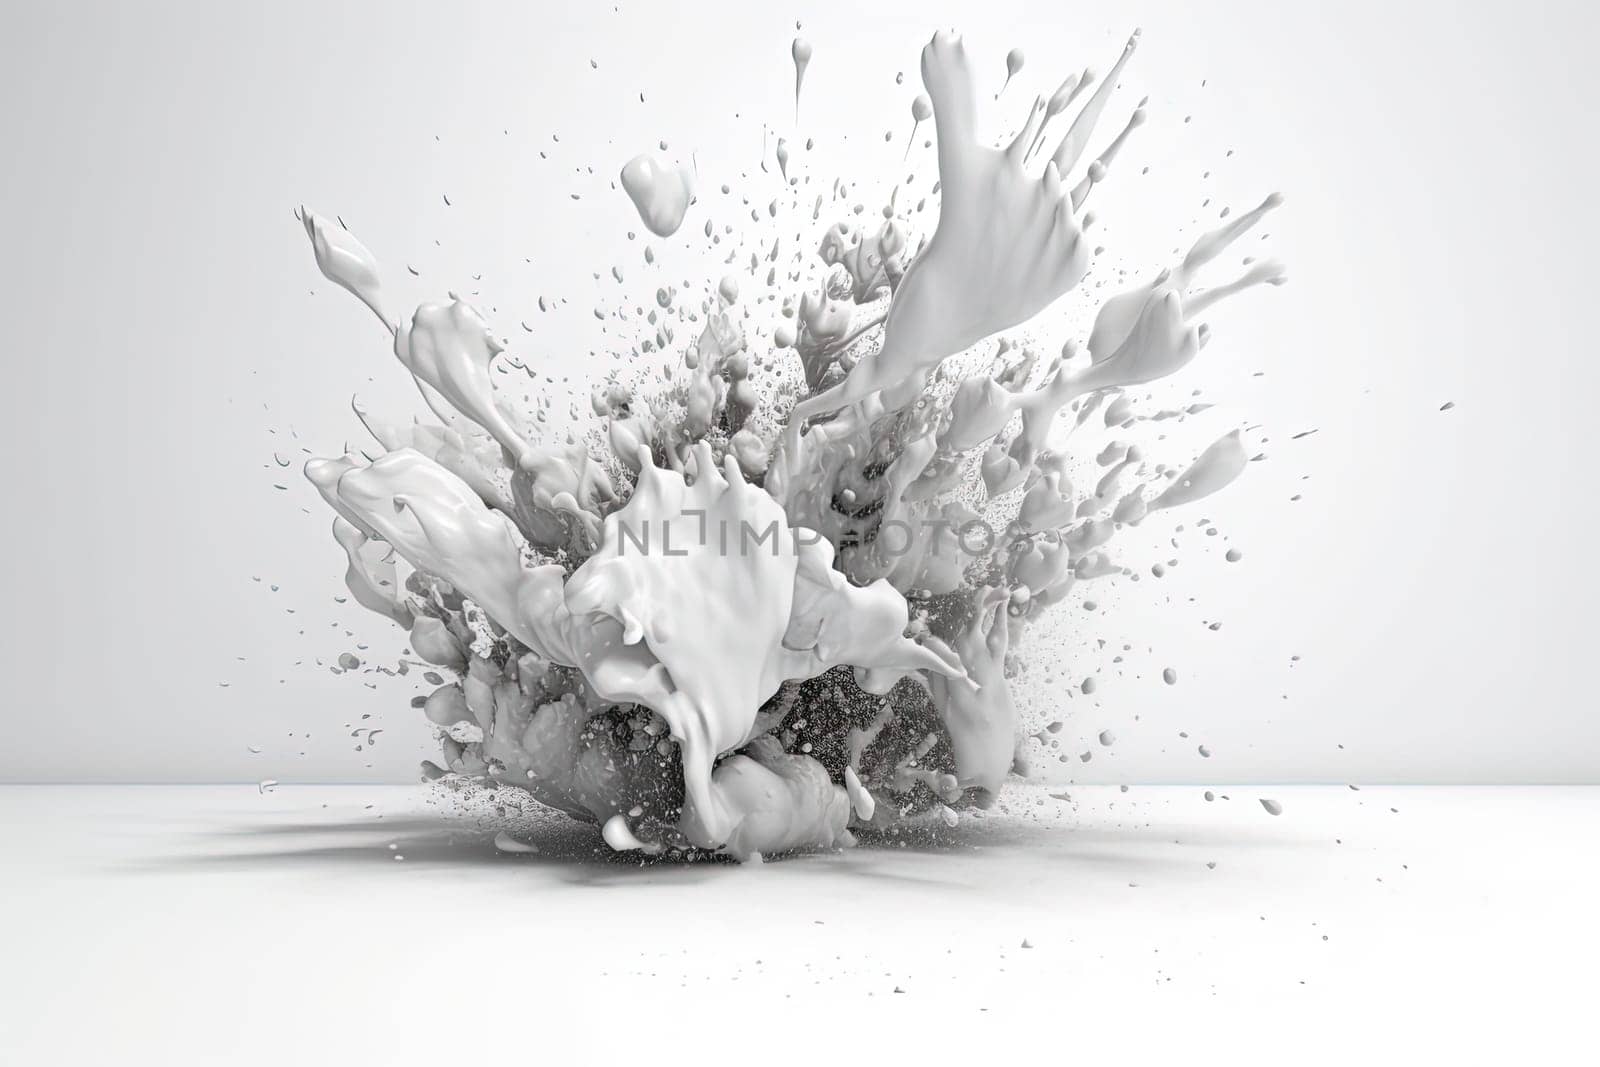 drops and splashes of white paint by tan4ikk1